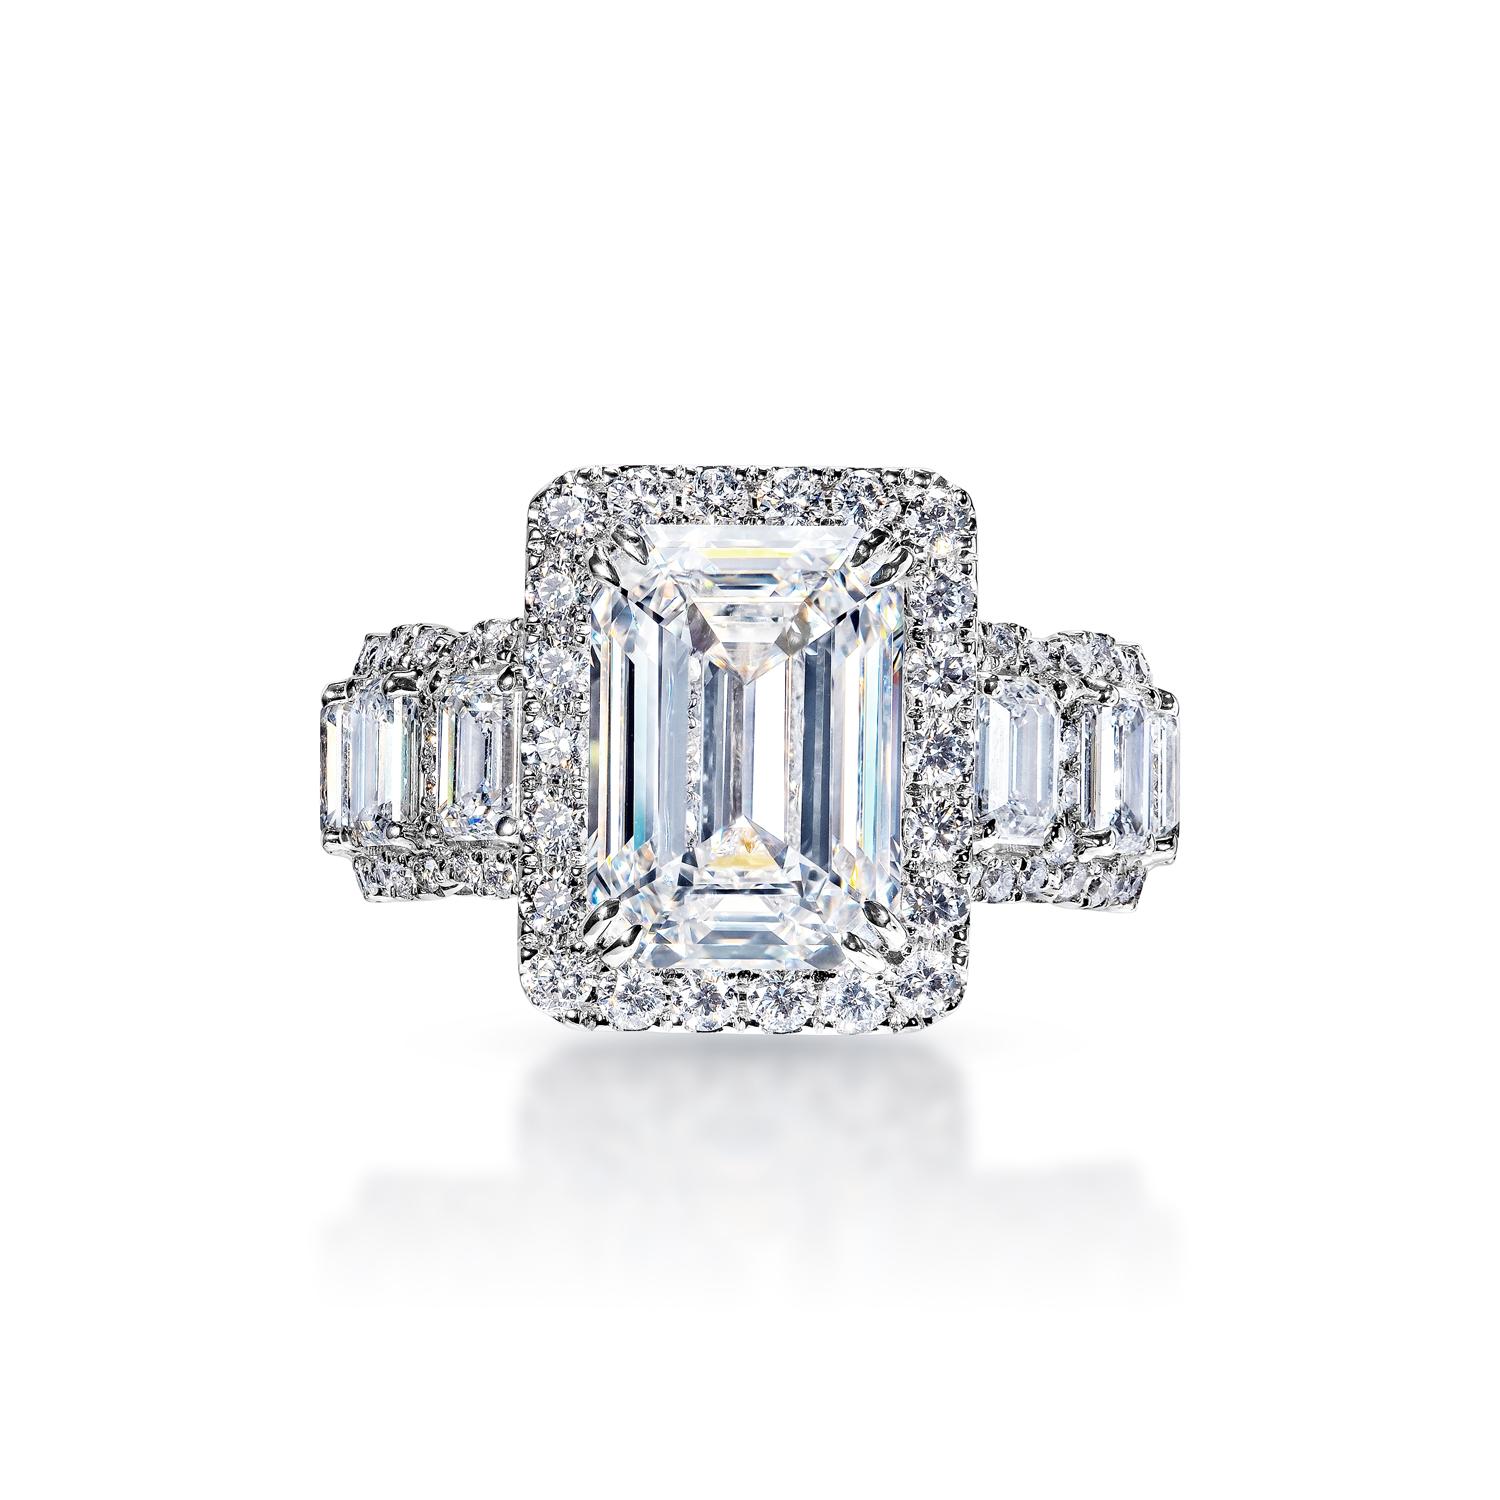 GIA Certified


Center Earth Mined Diamond:
Carat Weight: 5.03 Carats
Color: G*
Clarity: VVS1
Style: Emerald Cut
*This Diamond has been treated by one or more processes to change its color

Ring:
Metal: 18 Karat White Gold
Carat Weight: 3.00